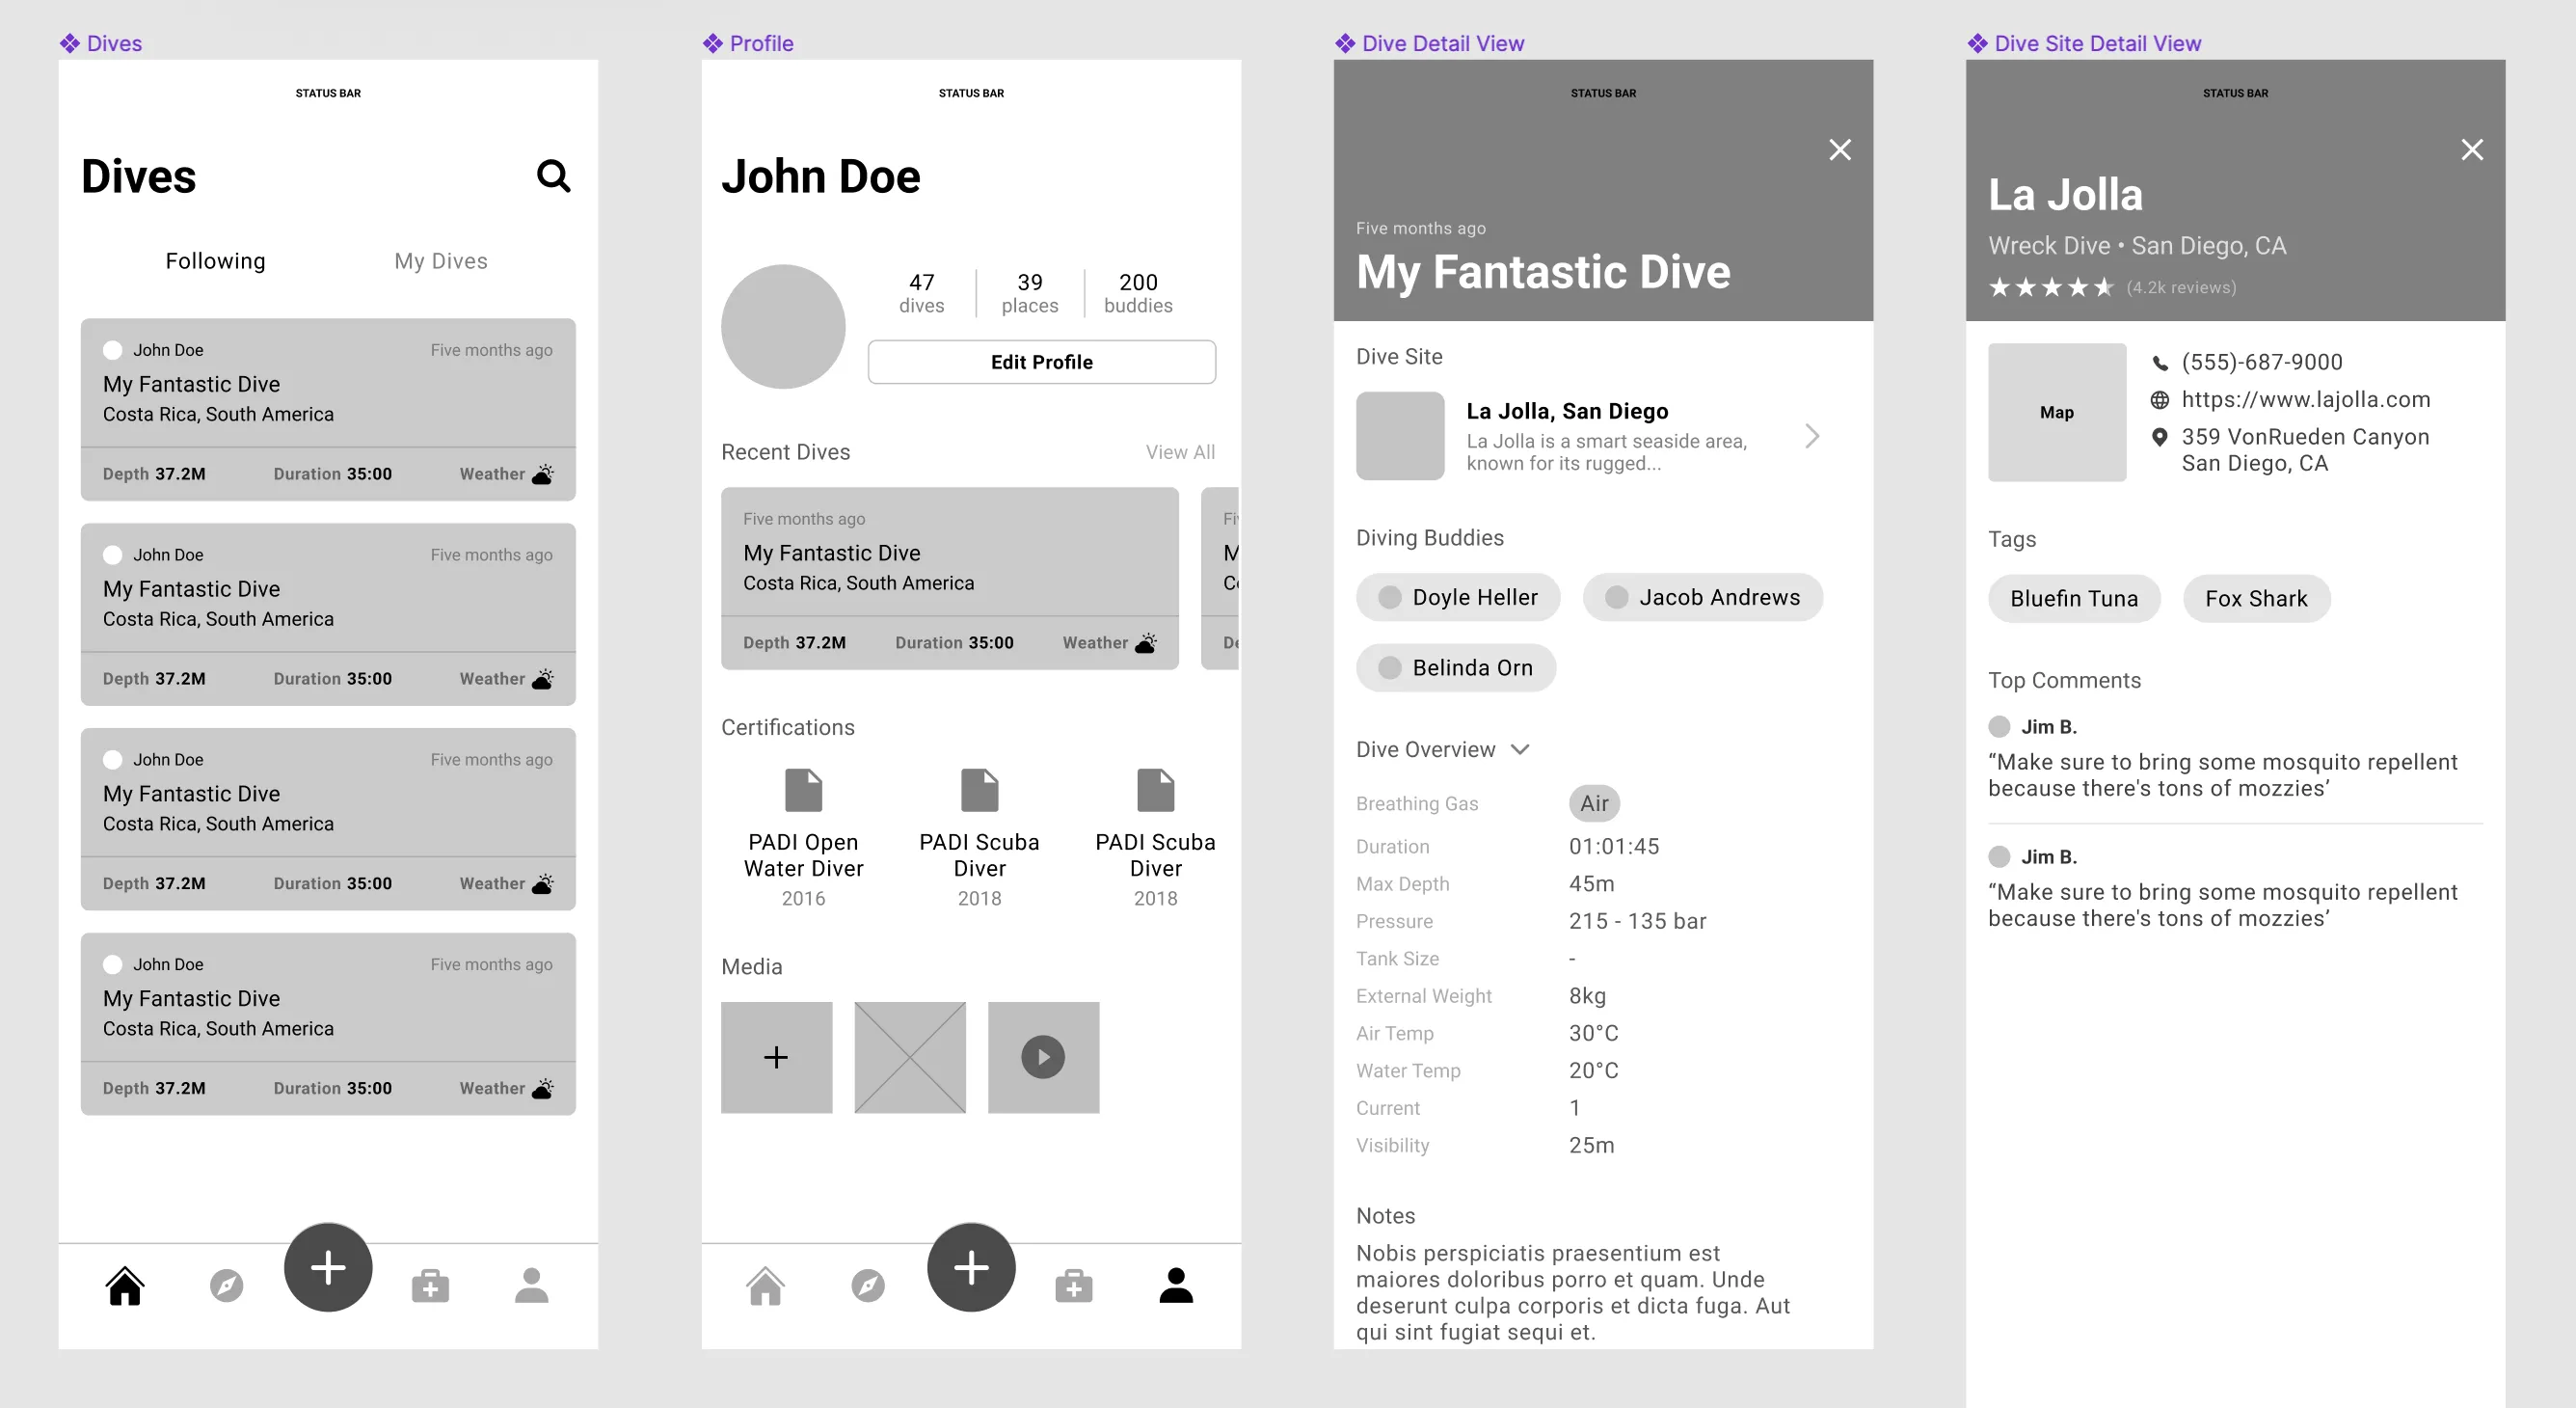 Several UI components would end up being revised as the feature set evolved. For example, a like/comment feature was added to the dive feed, which required a change in the card design.